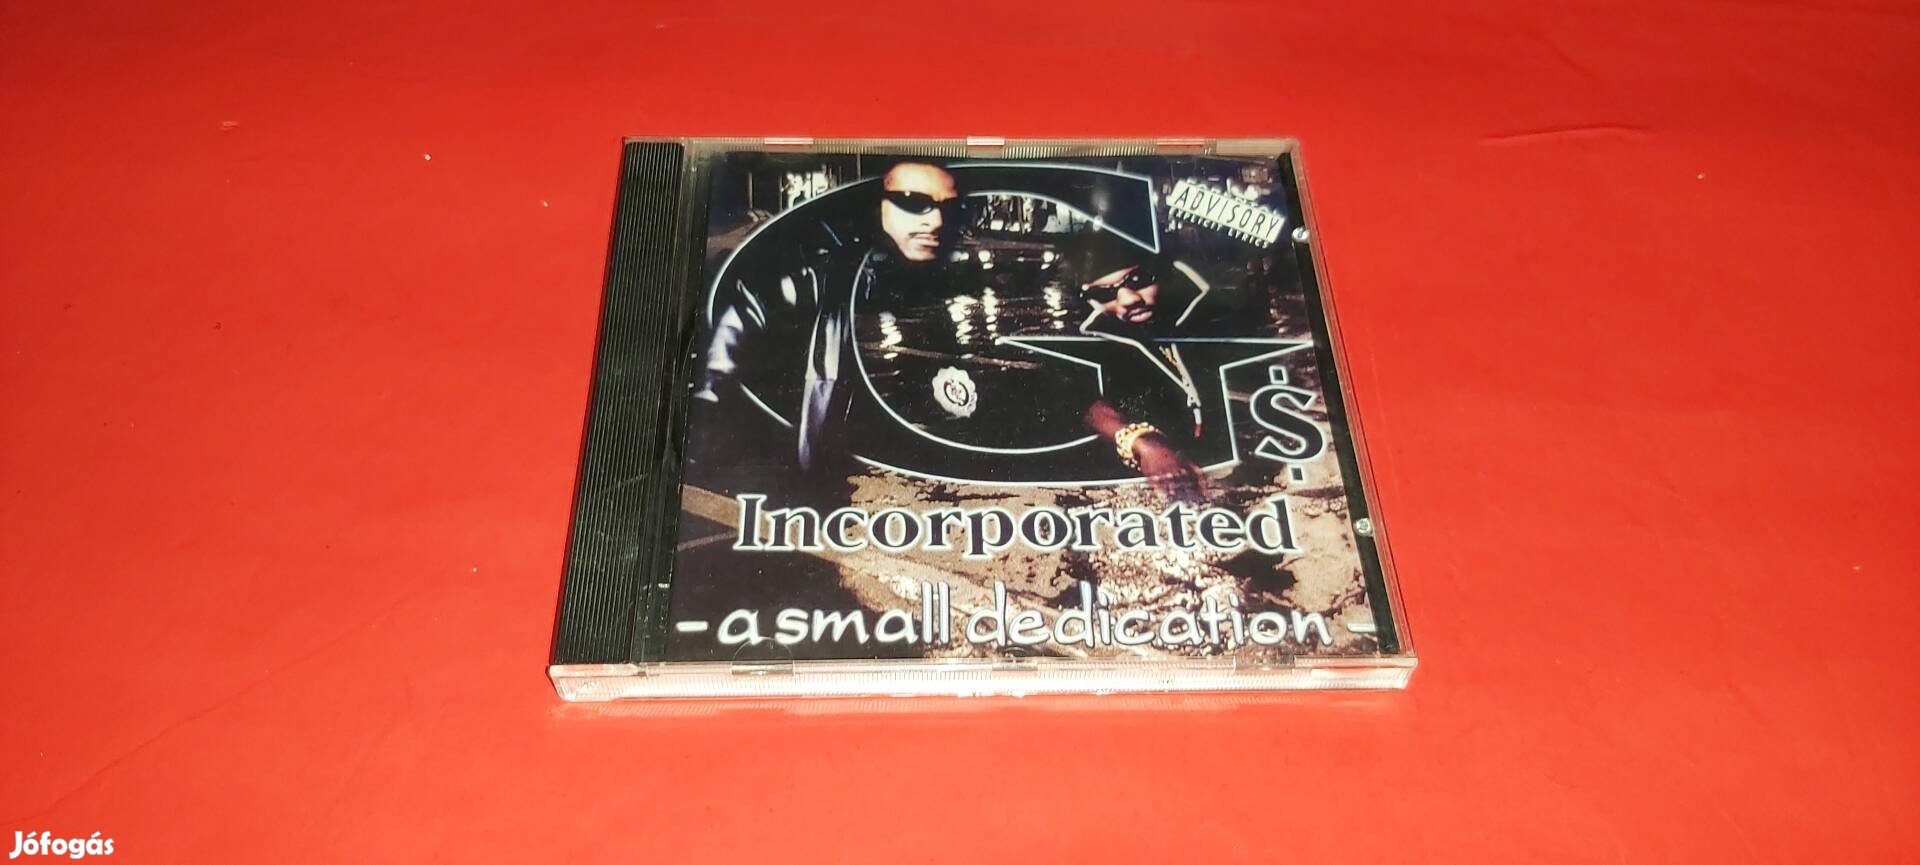 G's Incorporated A small collection Cd 1997 Hip Hop